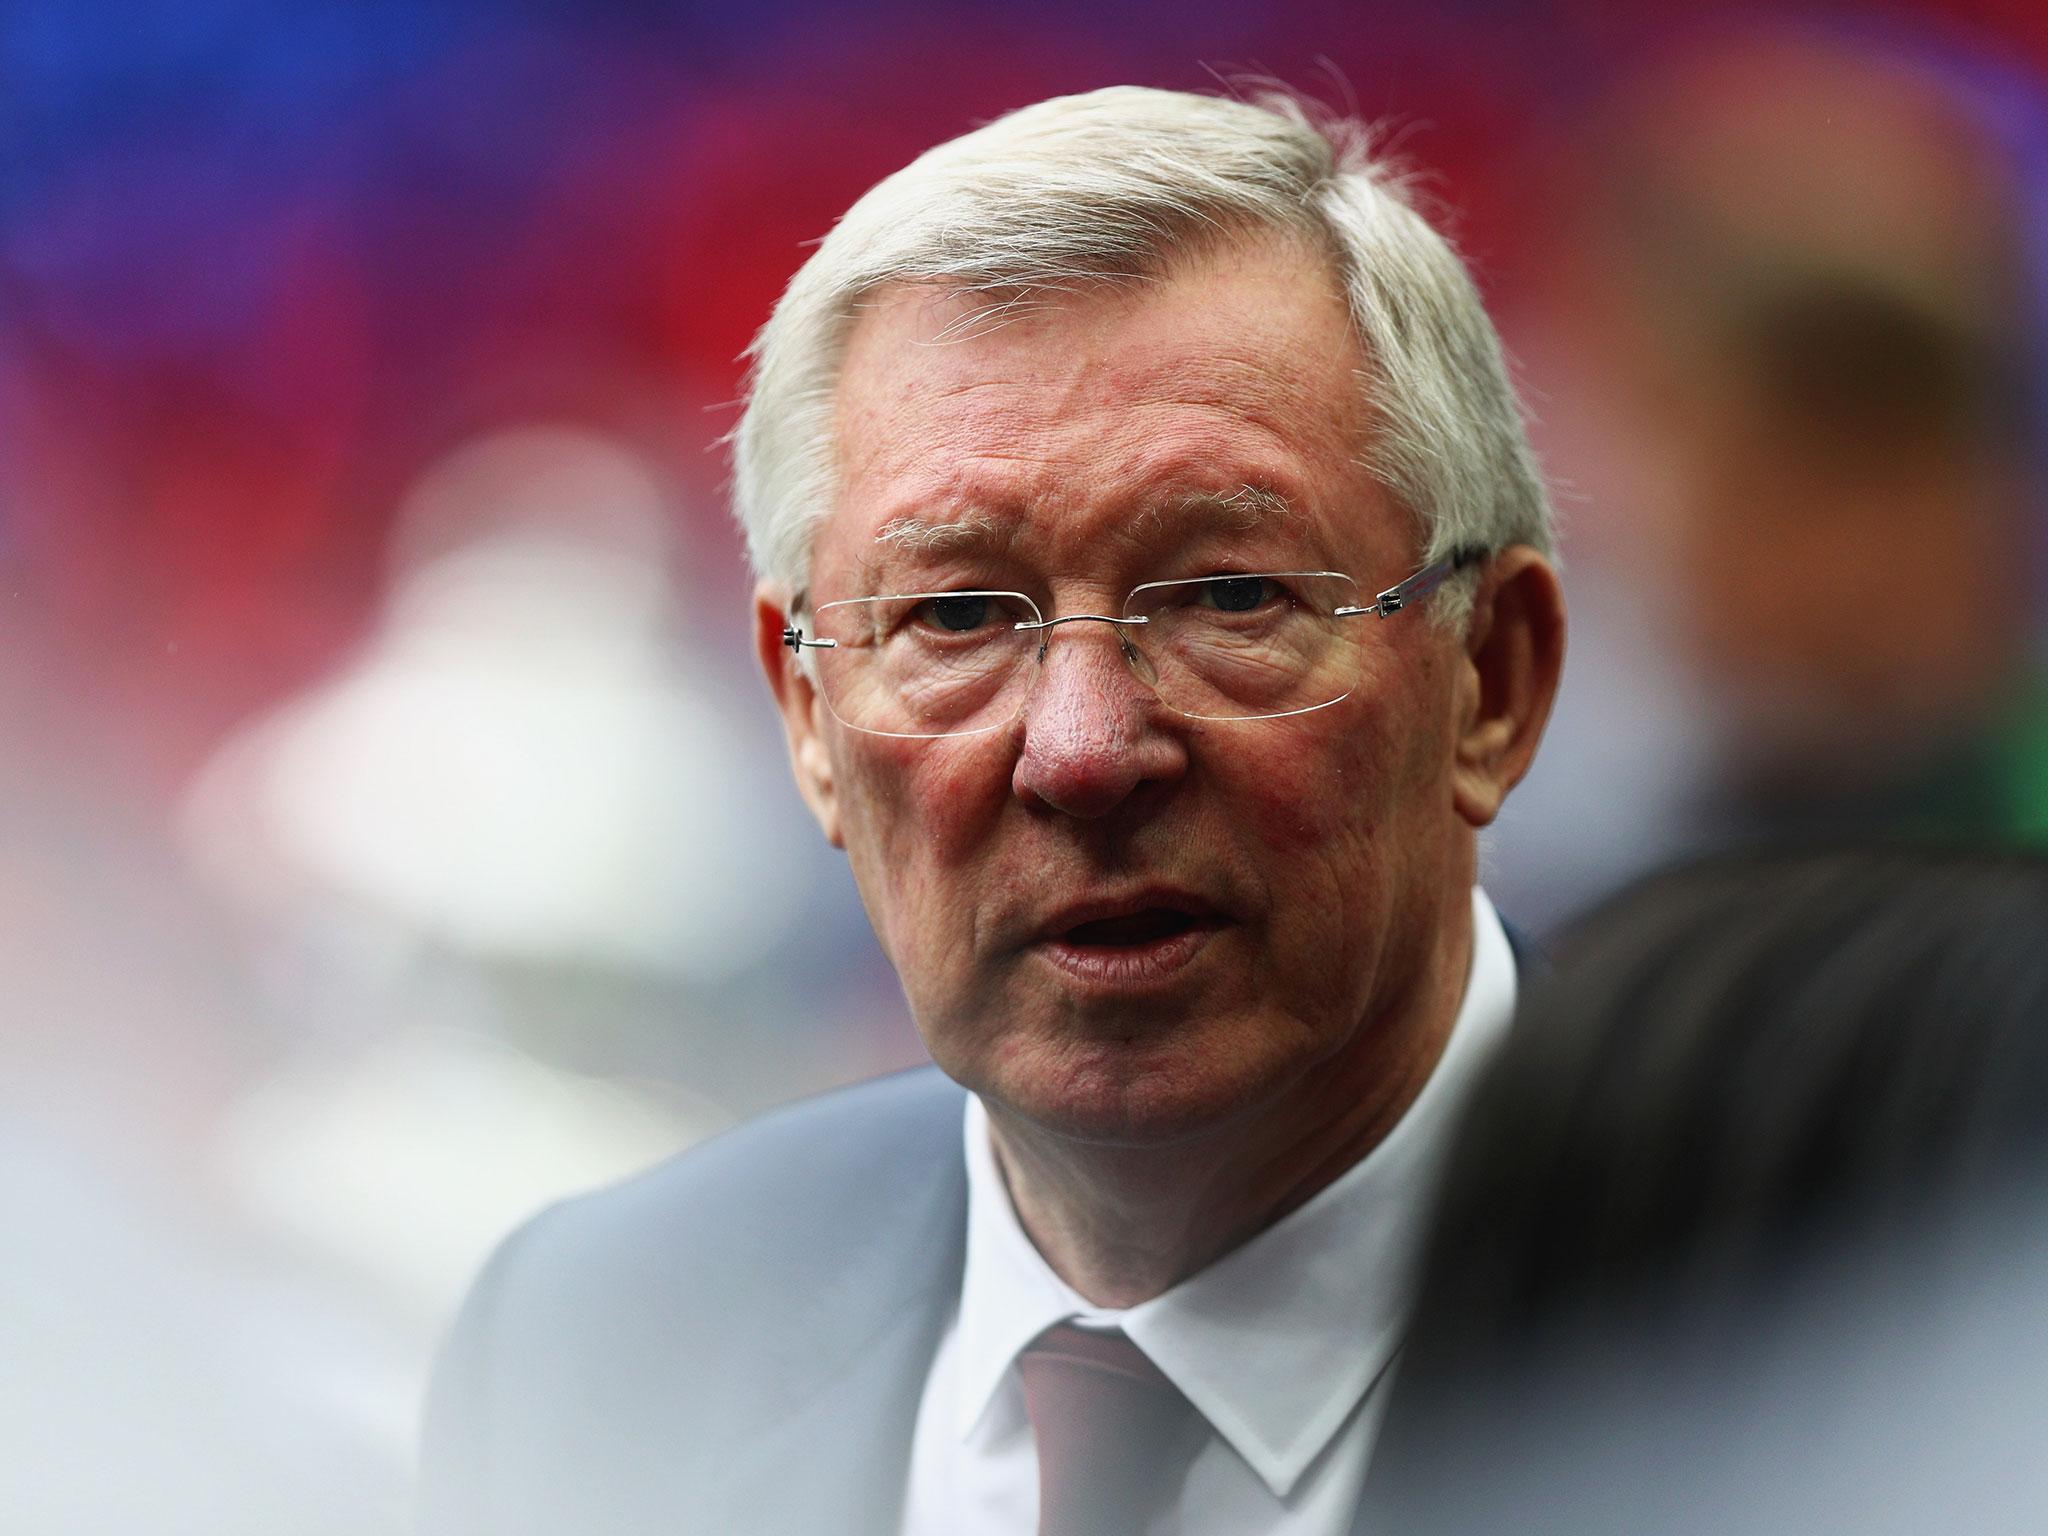 Sir Alex Ferguson stepped down as United manager in 2013